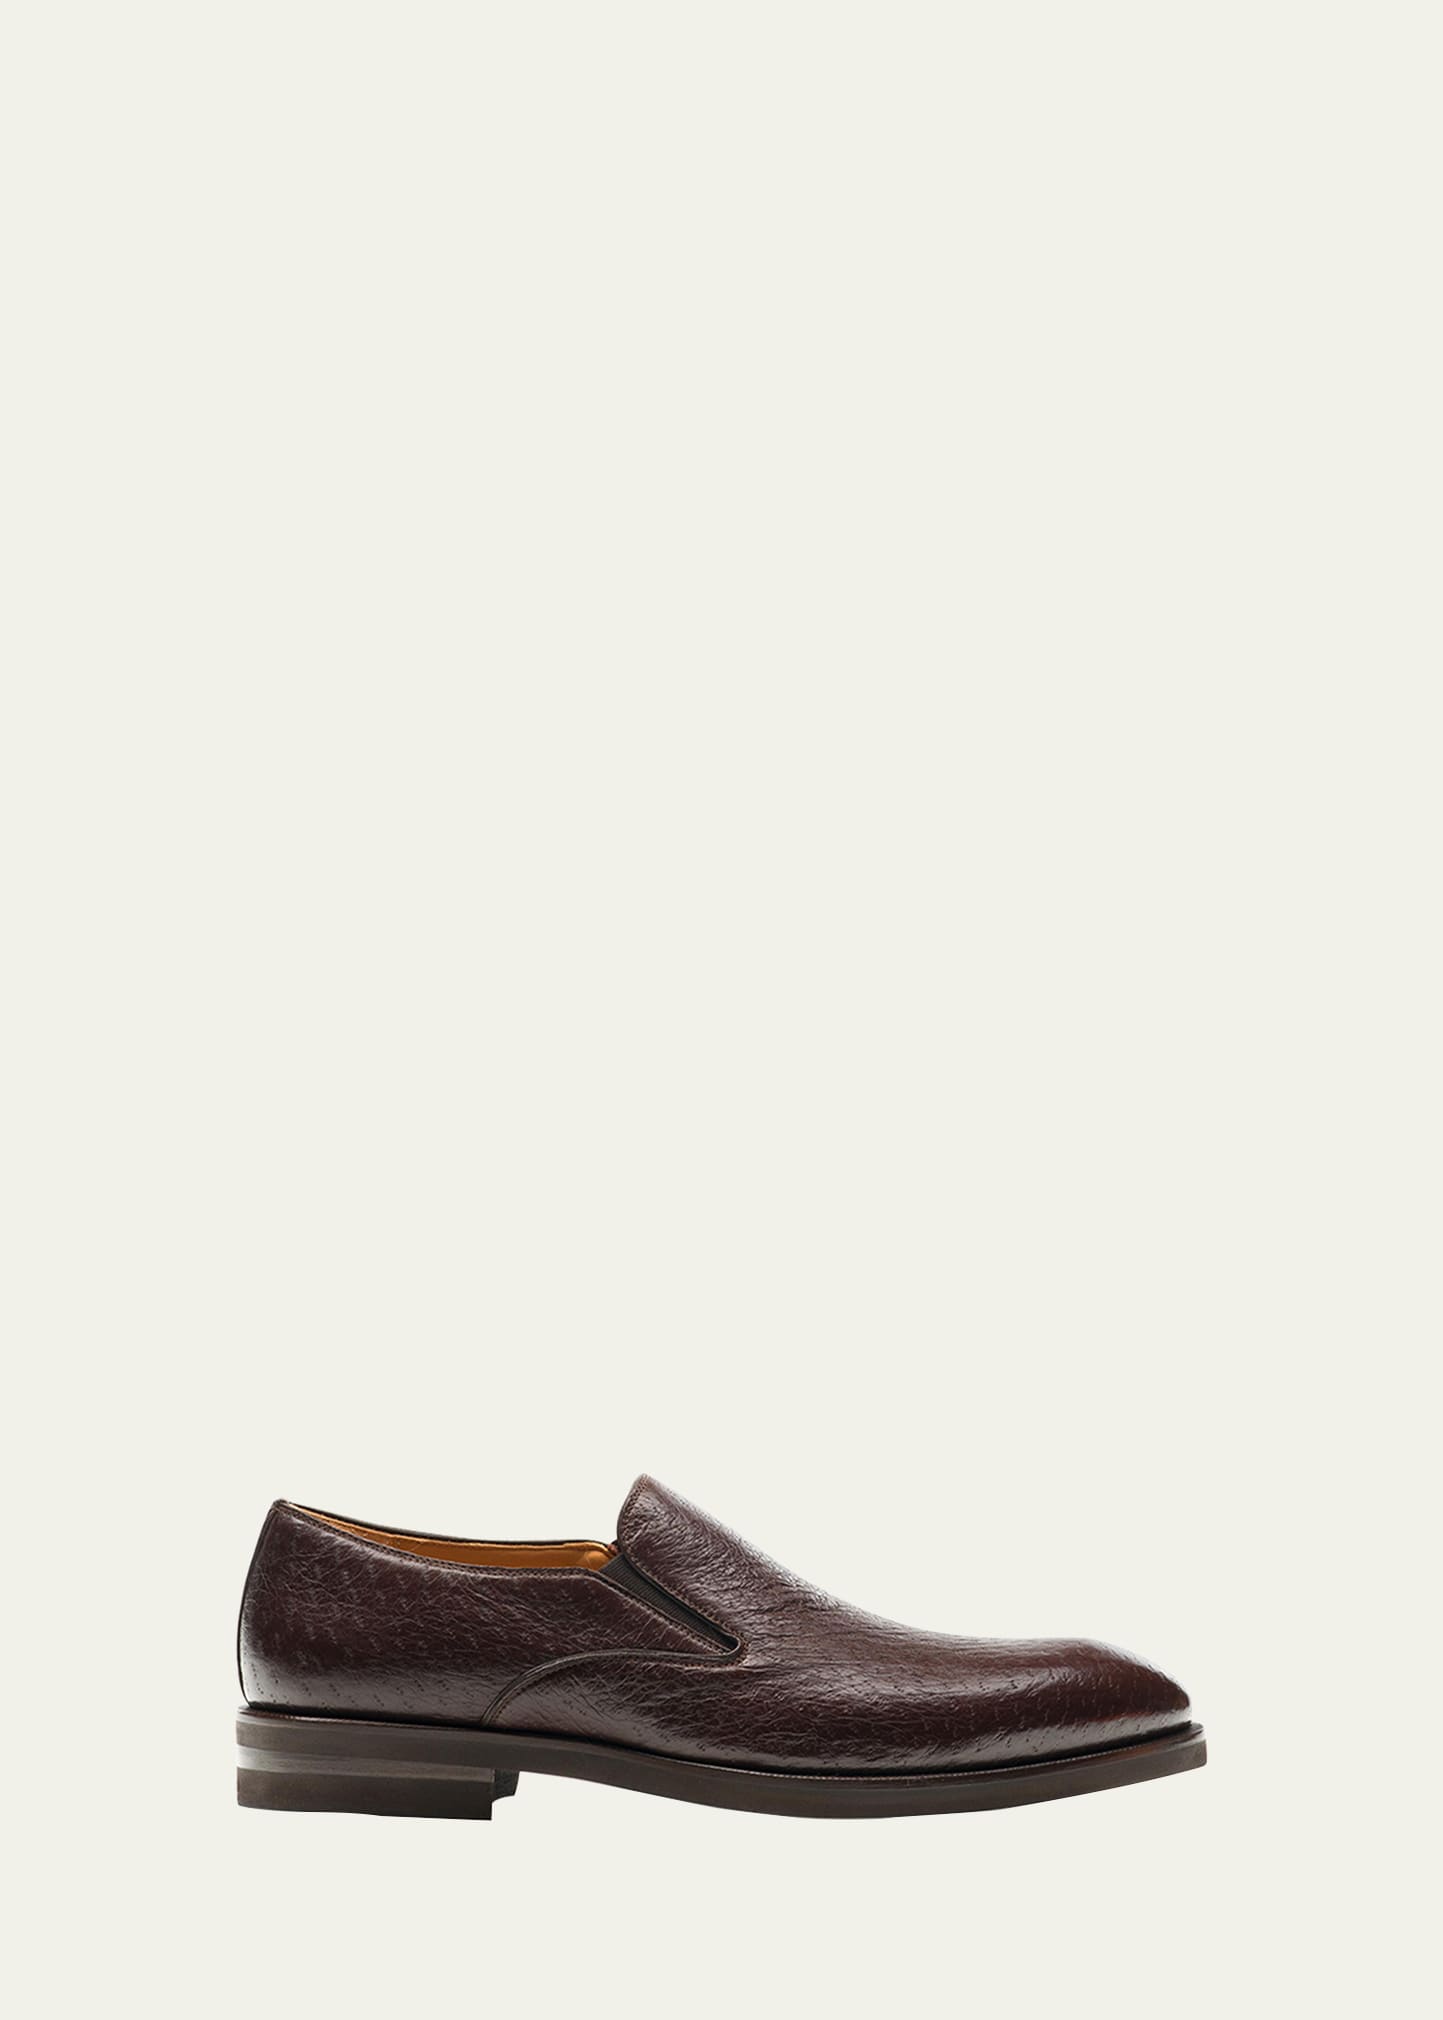 Magnanni Men's Lima Peccary Leather Loafers In Brown